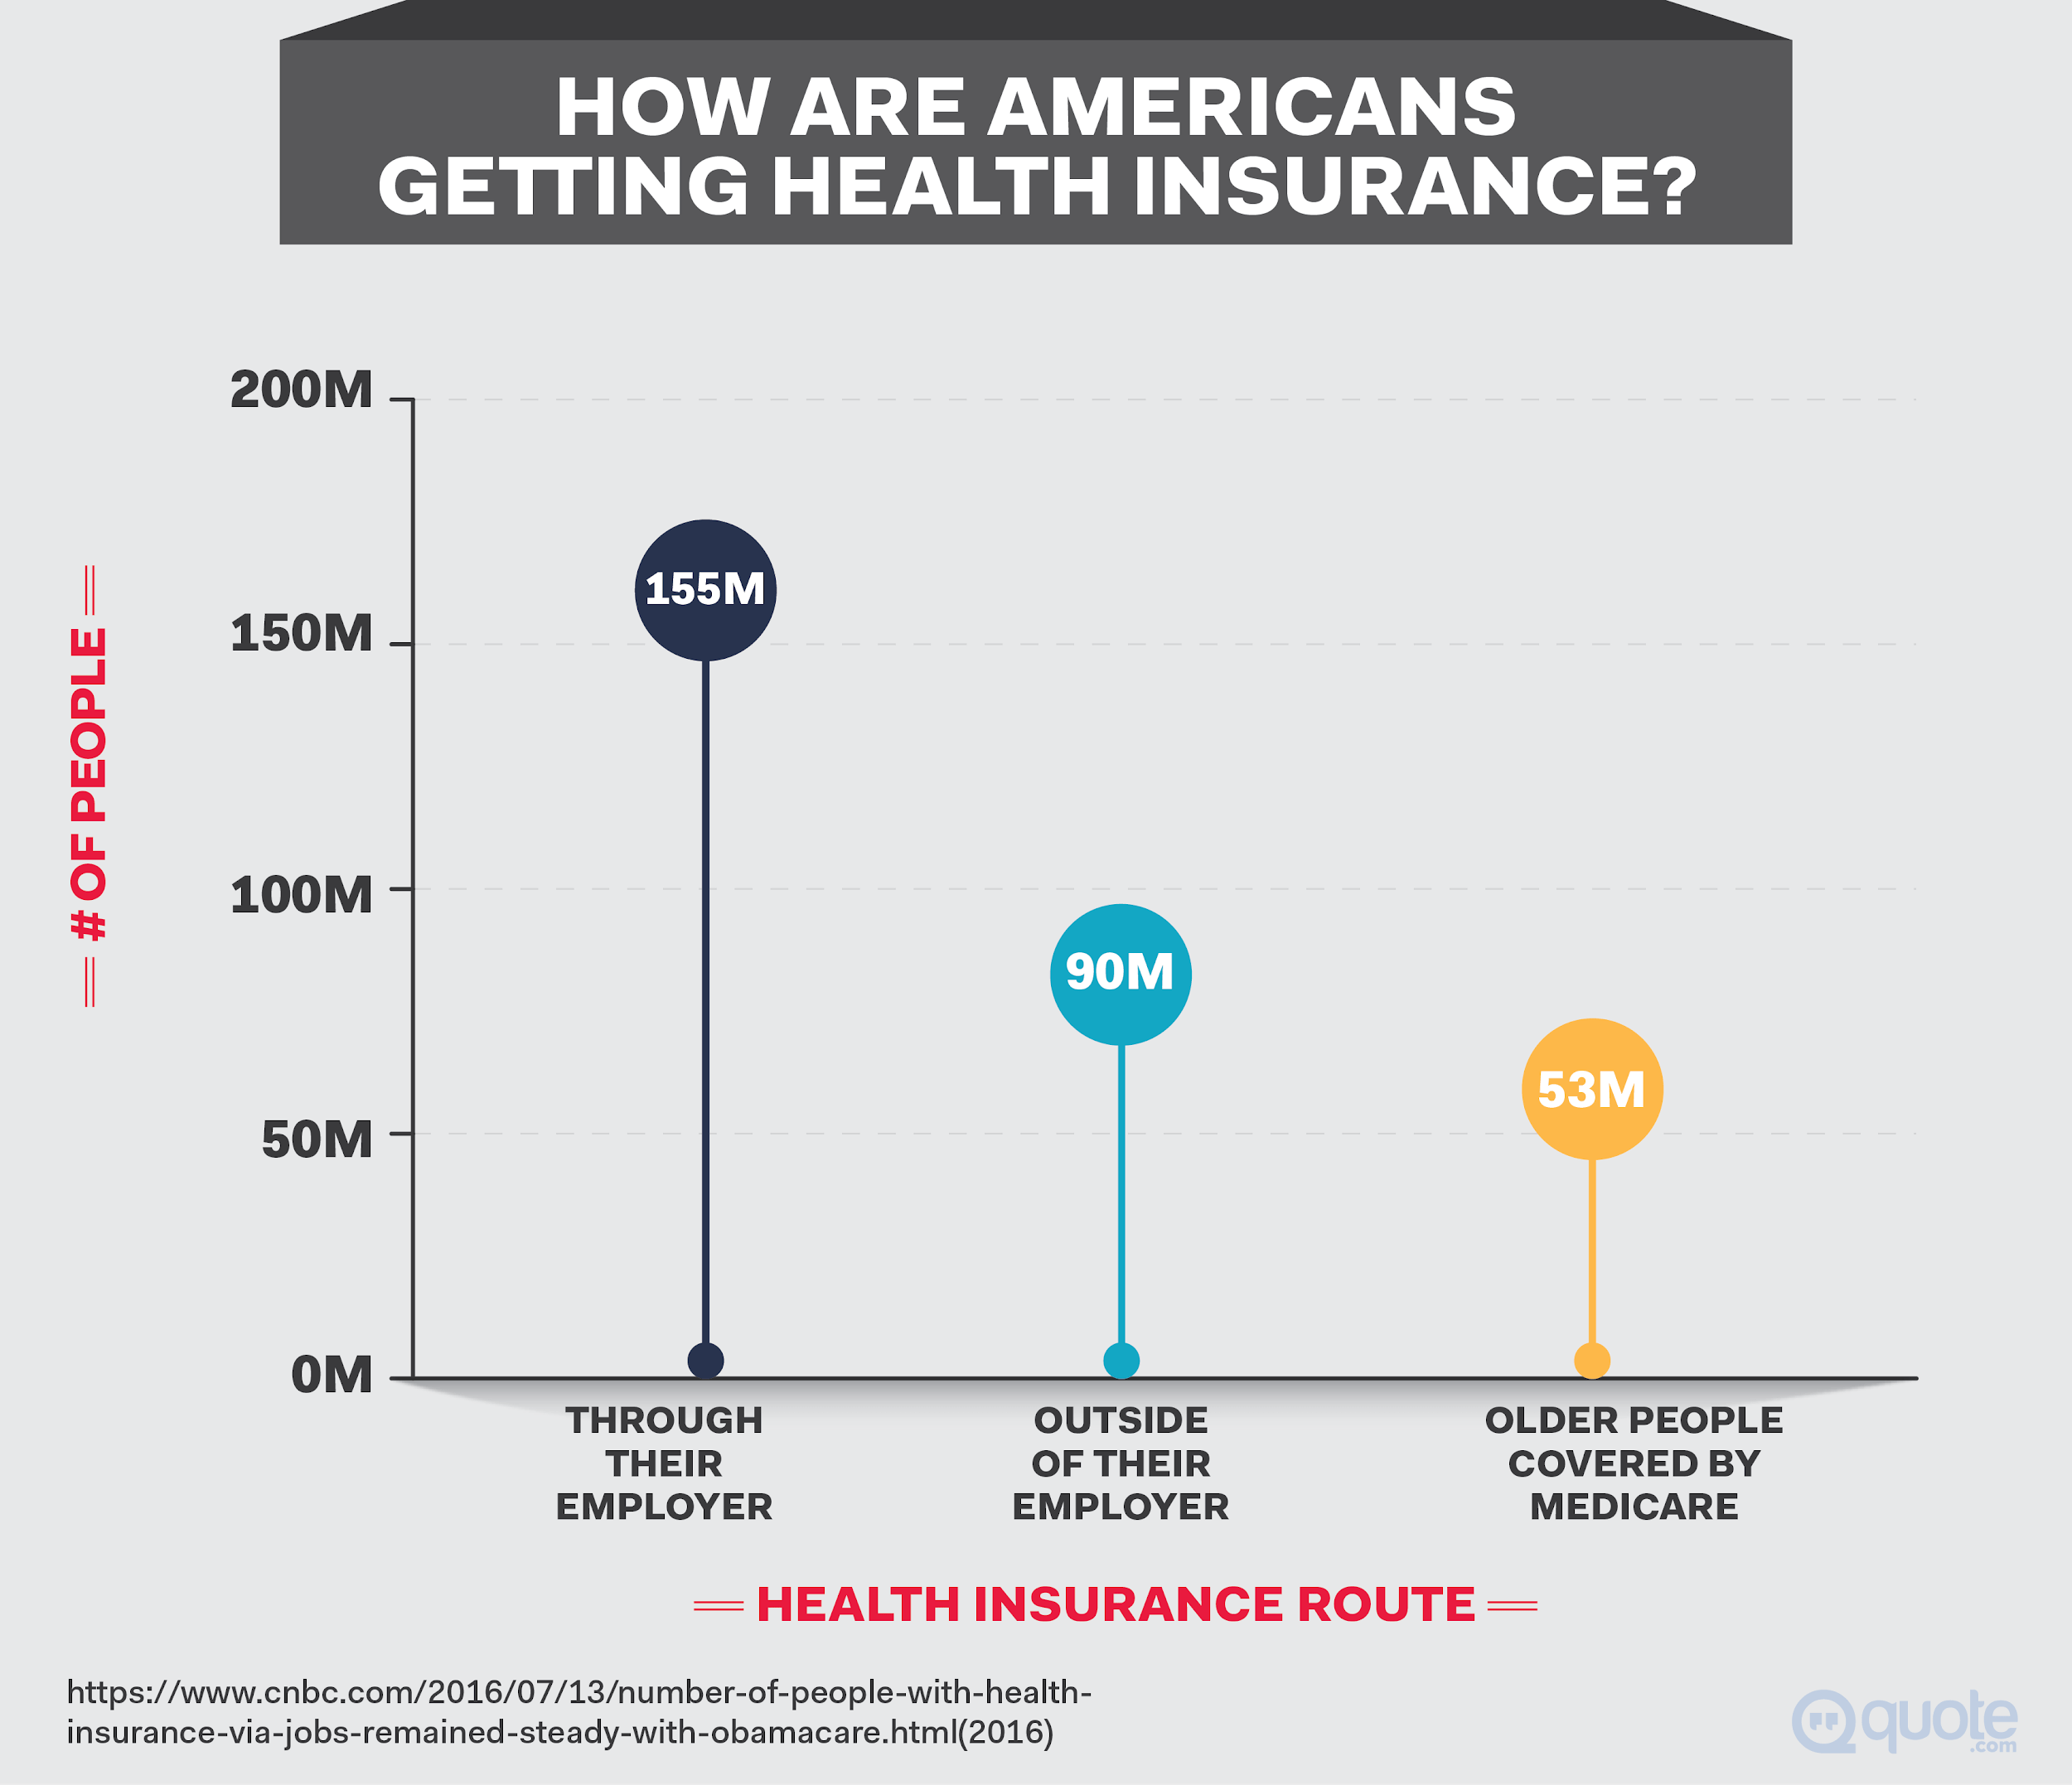 How Are Americans Getting Health Insurance?